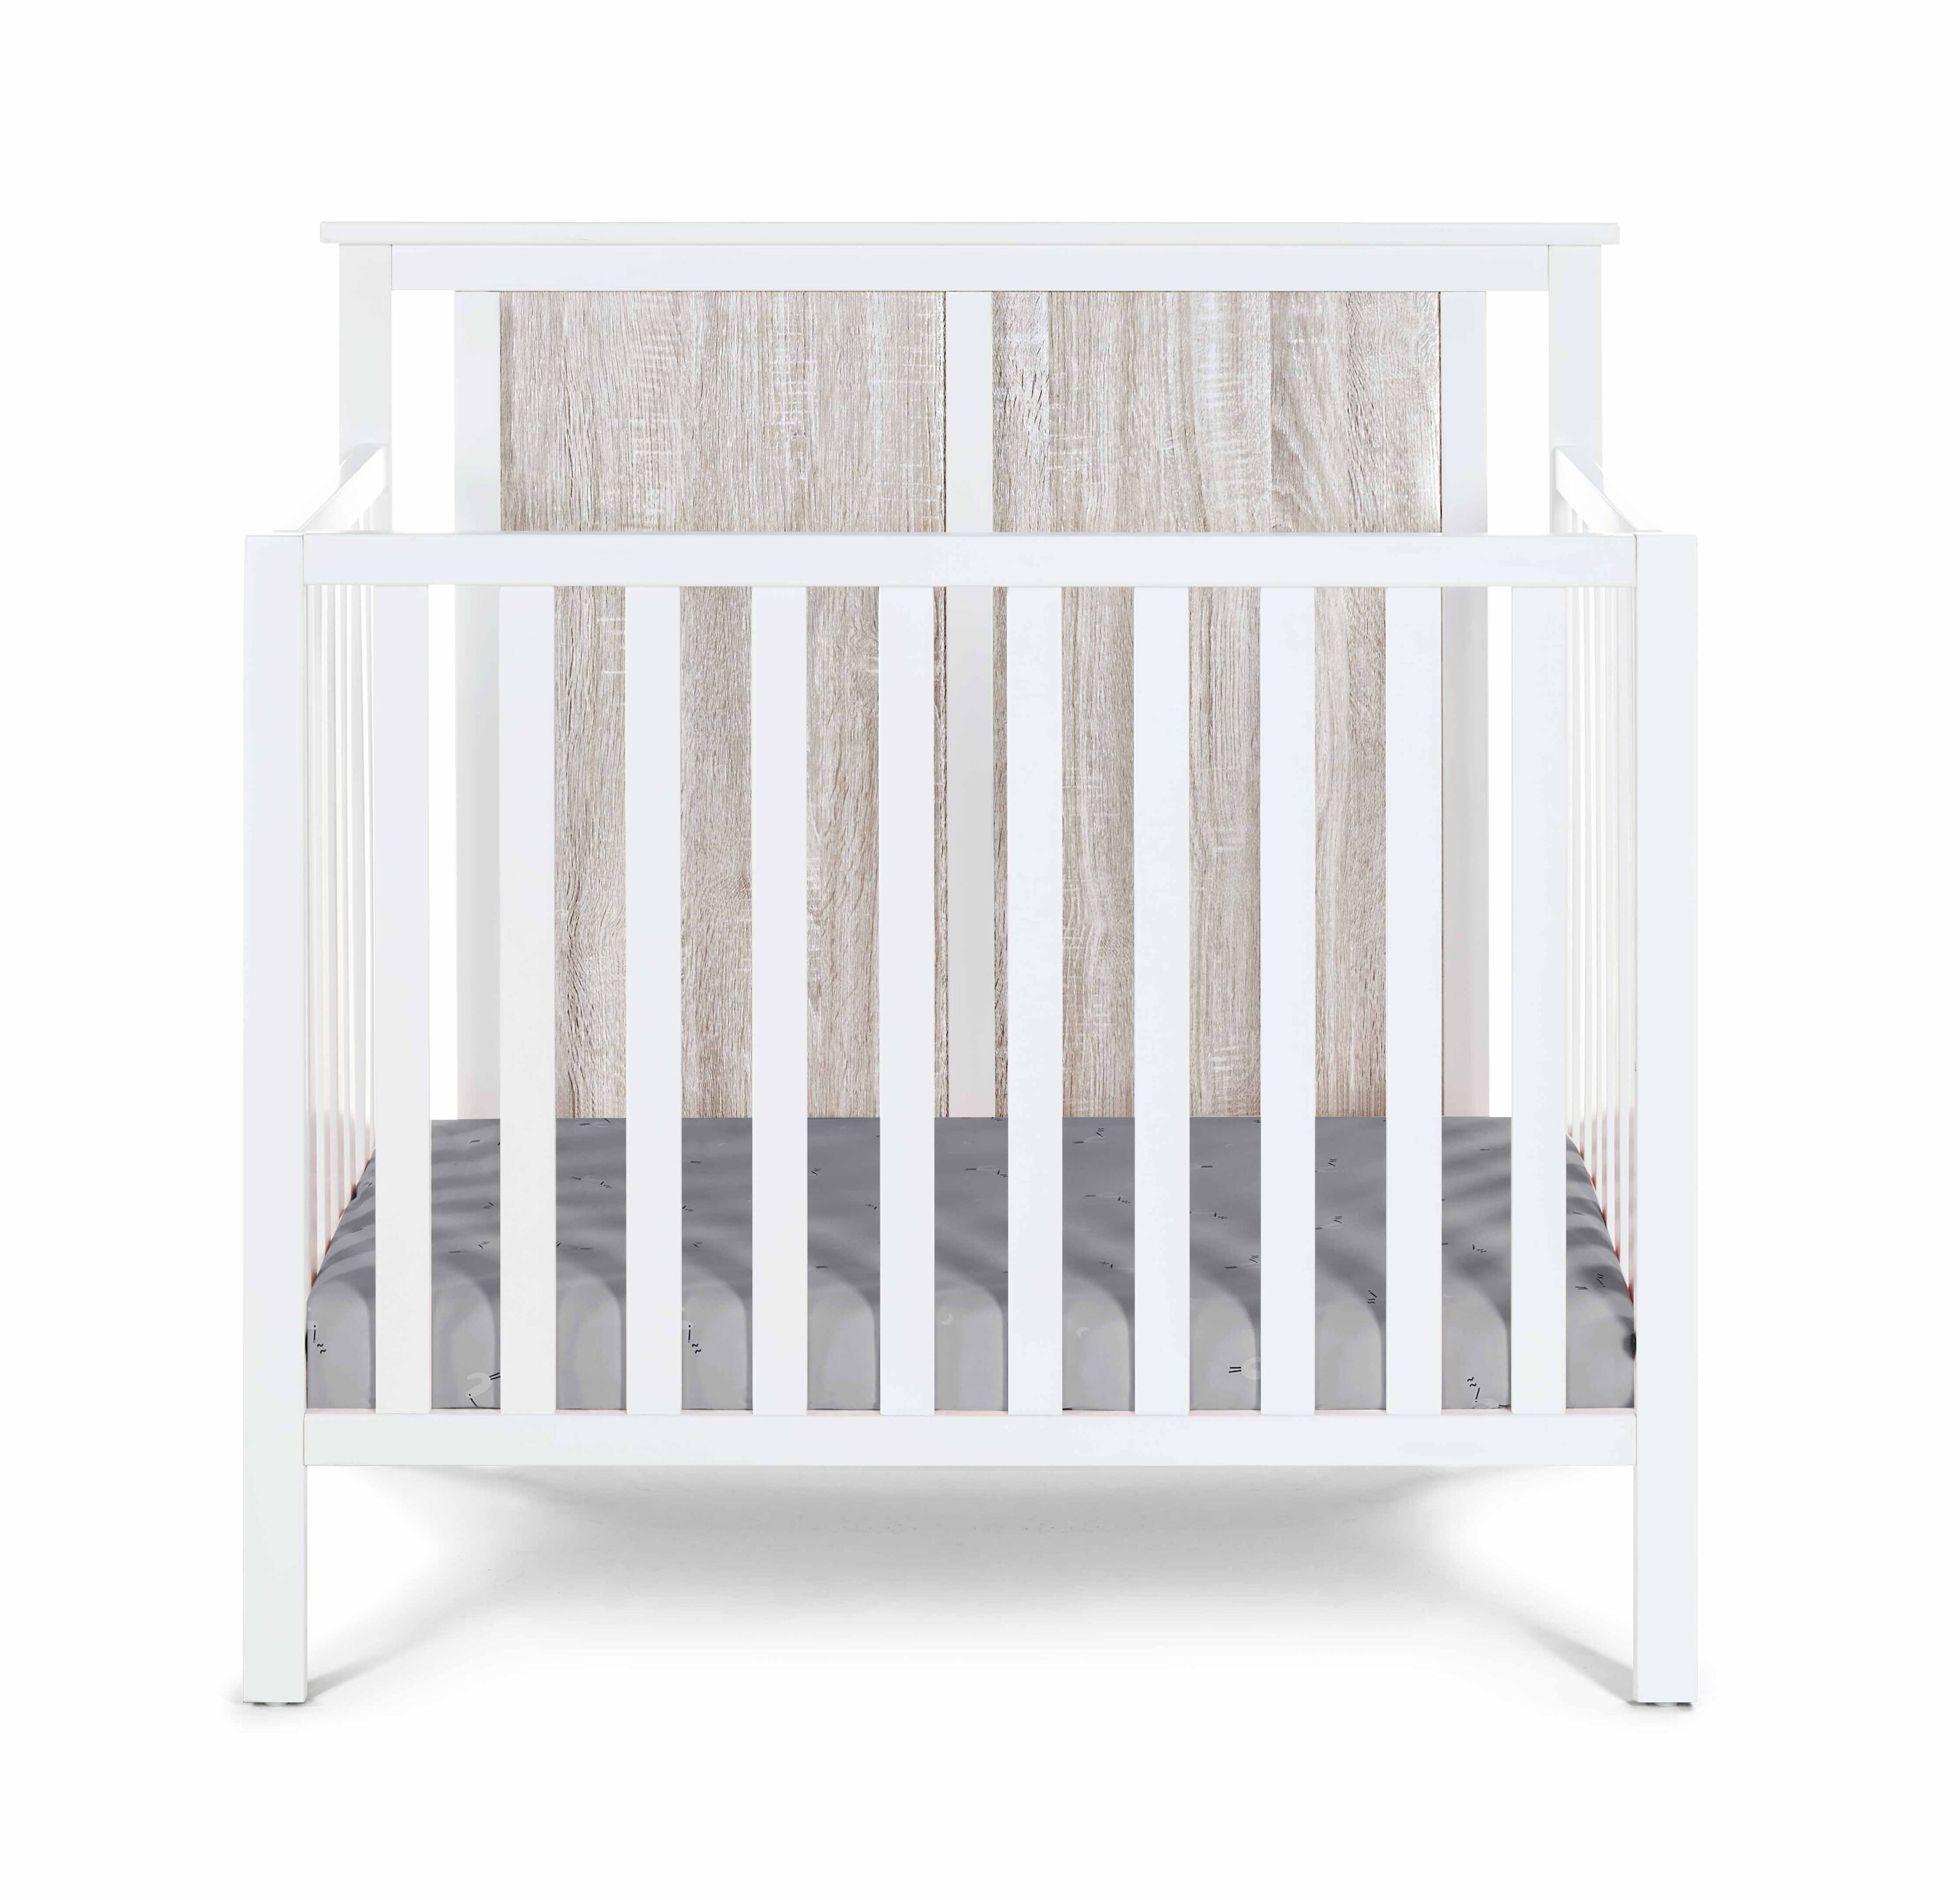 Suite Bebe Connelly 3-in-1 Mini Crib - Solid Wood Construction, Adjustable Mattress Height, JPMA Certified - Transitional Style, White Finish -  27599-WH